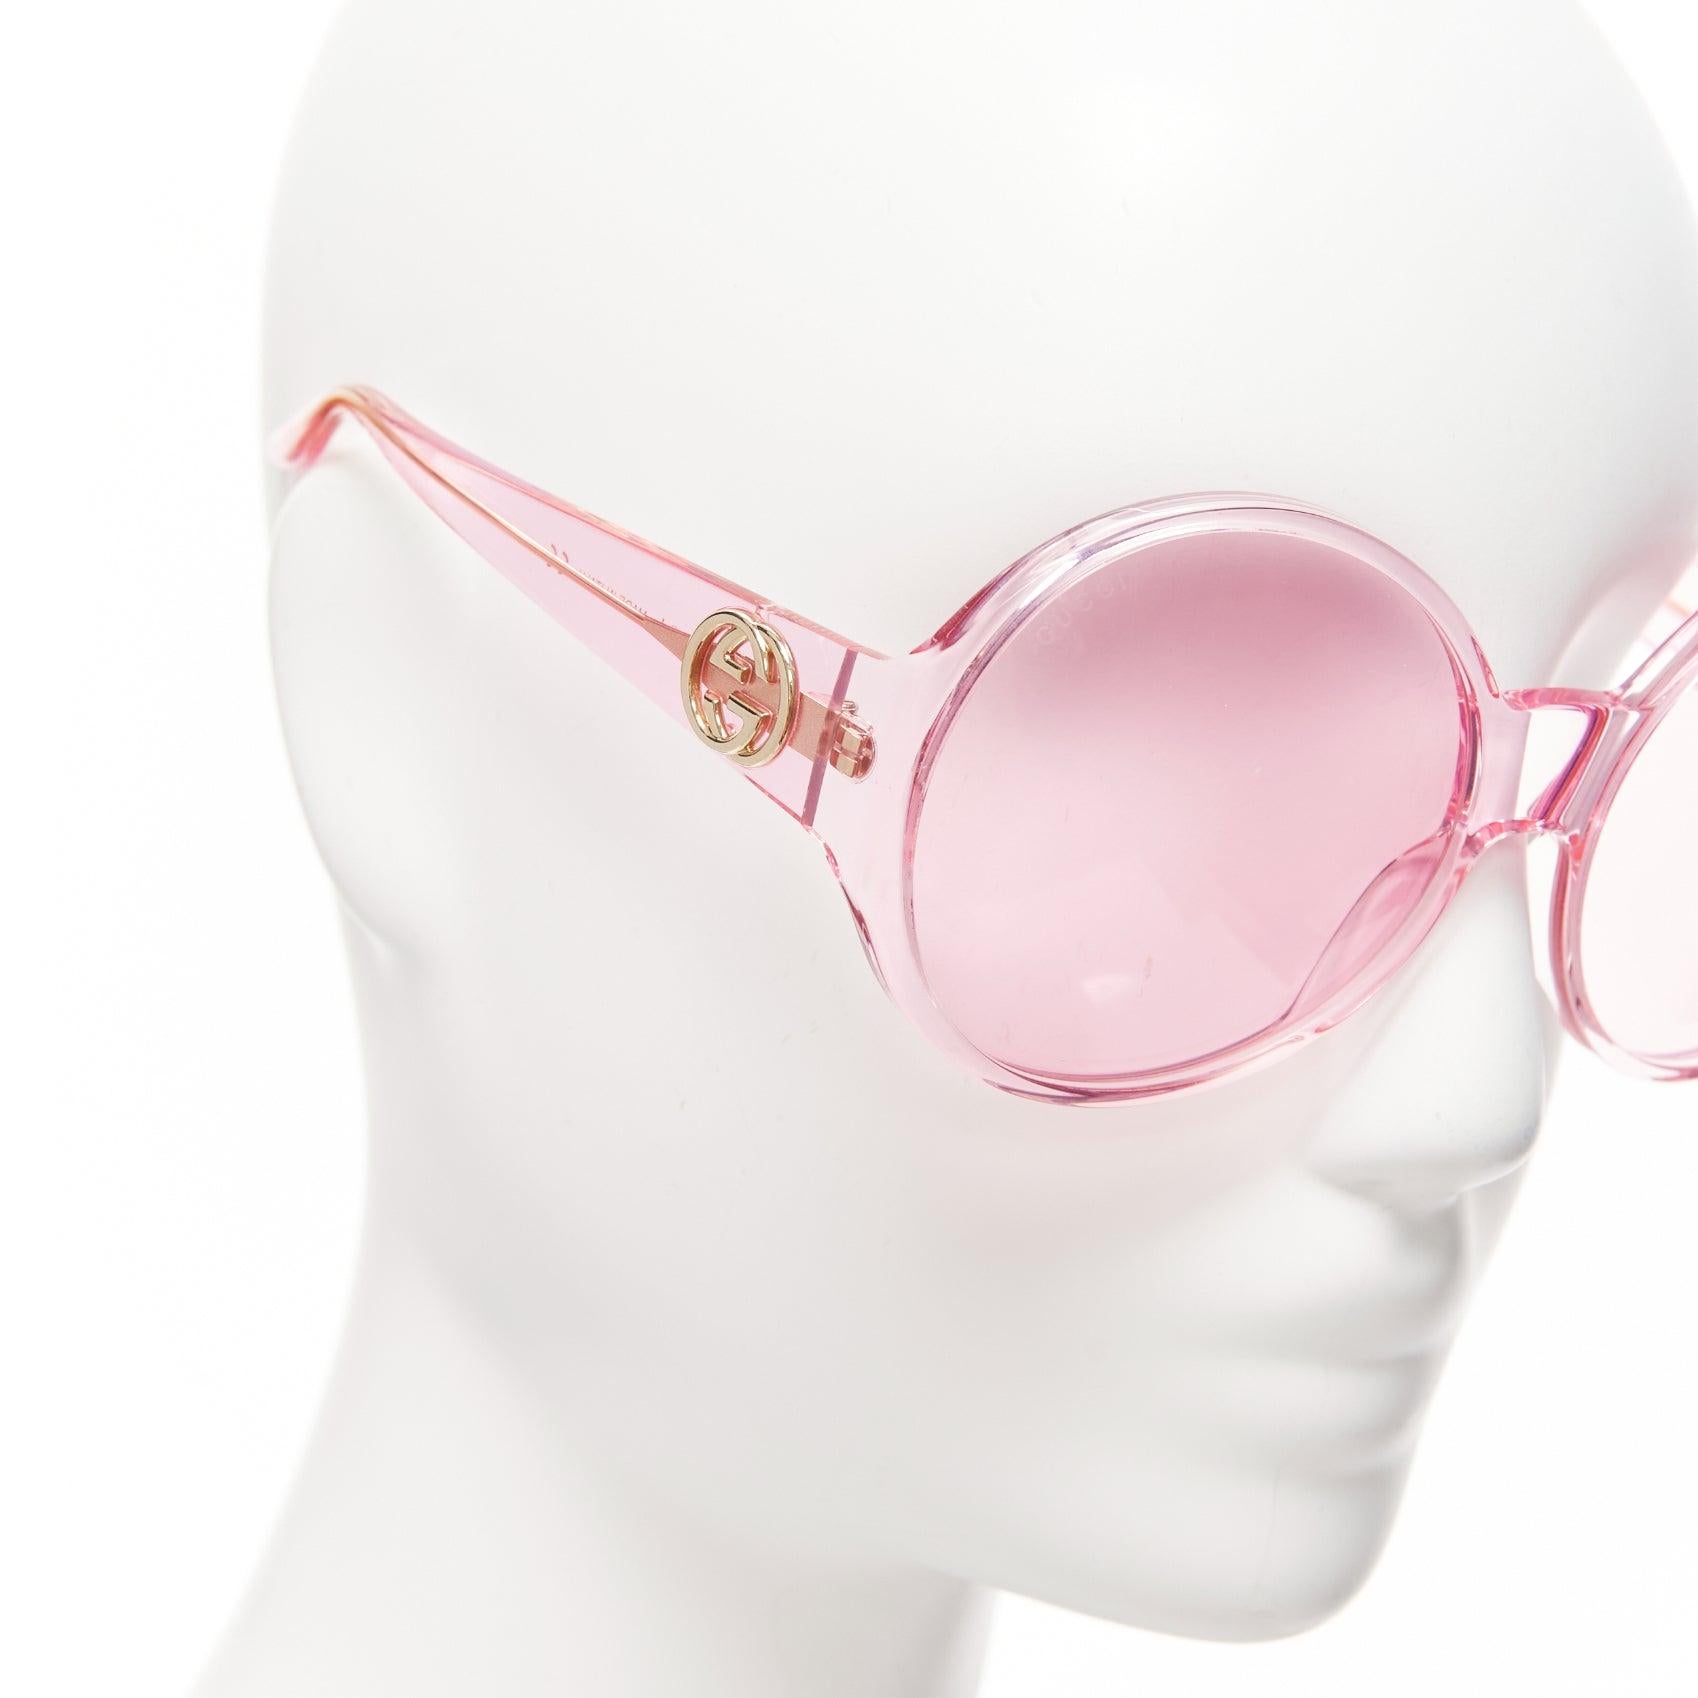 GUCCI Alessandro Michele GG0954S pink hue round frame oversized sunnies For Sale 2